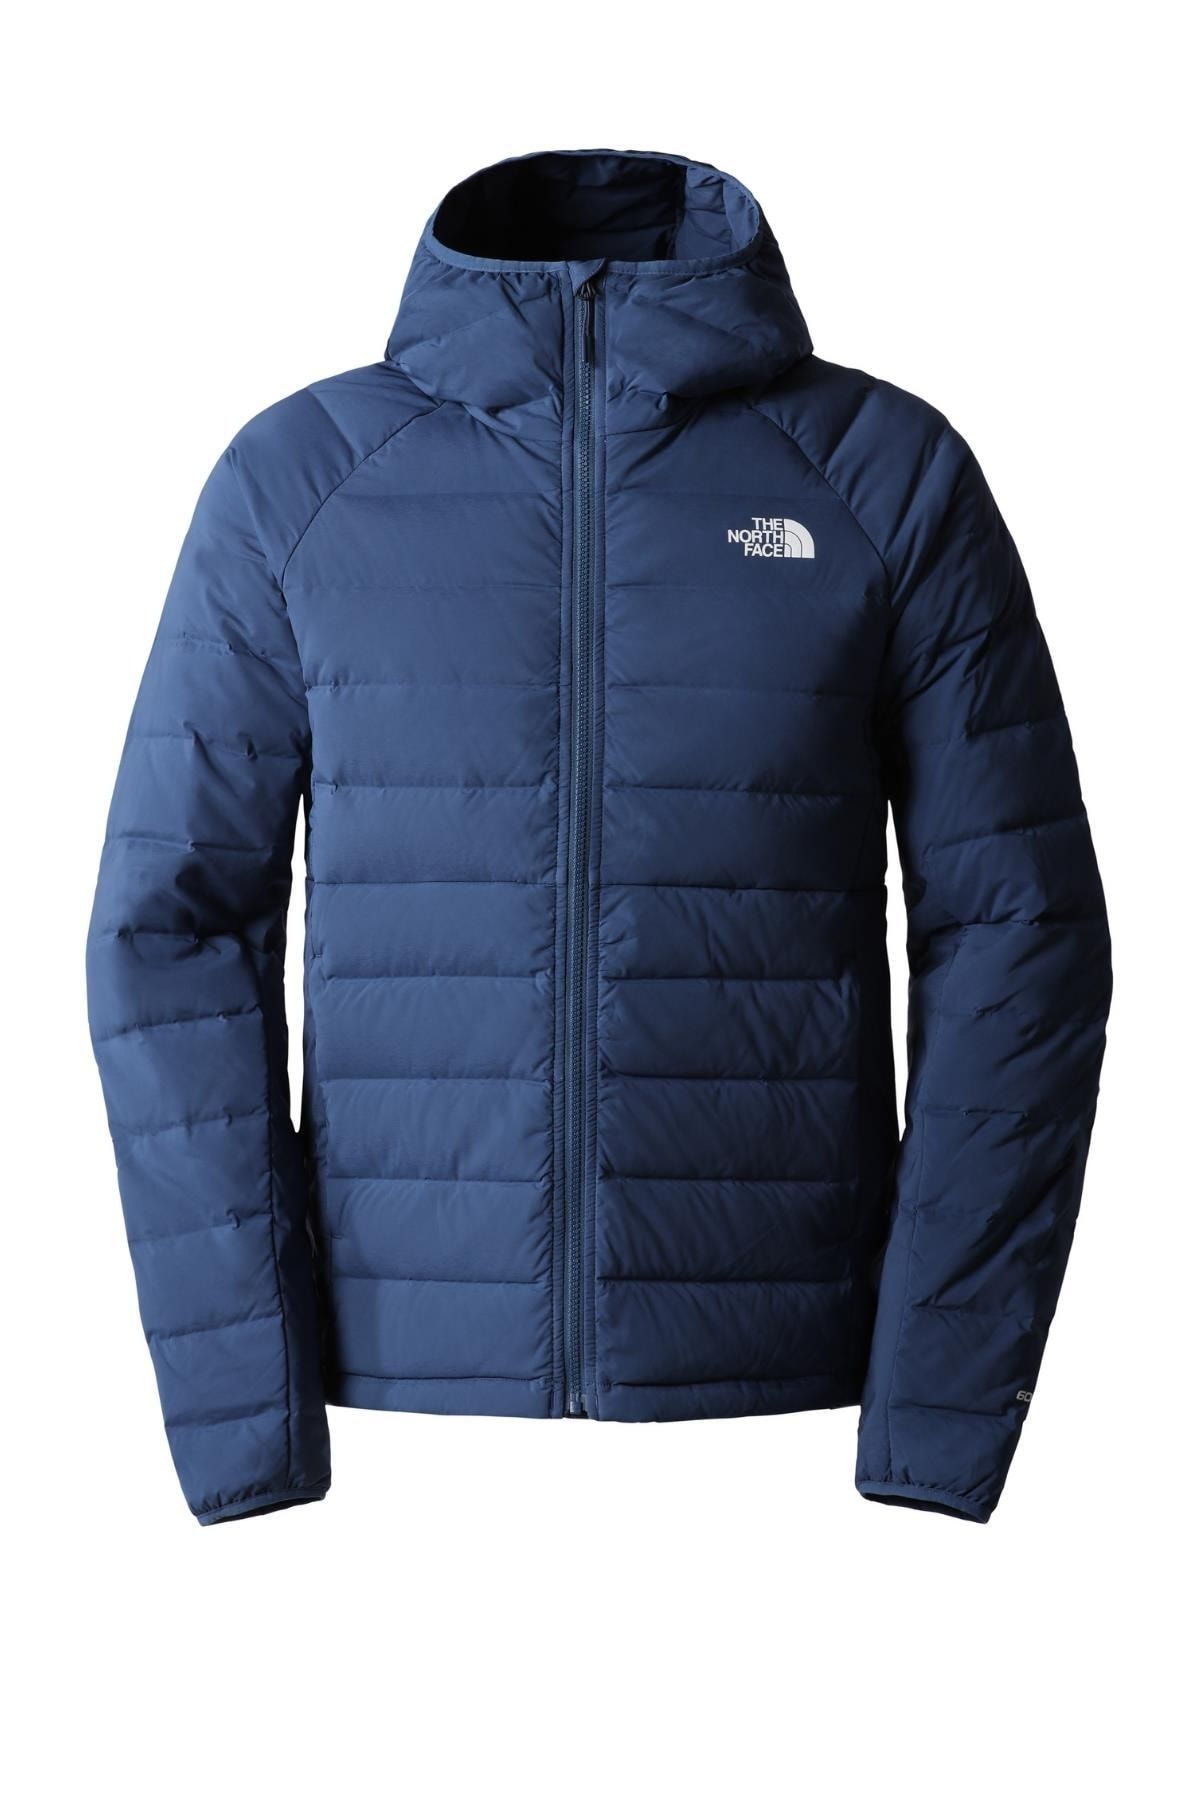 The North Face Belleview Stretch Down Hoodie Mont Erkek Lacivert